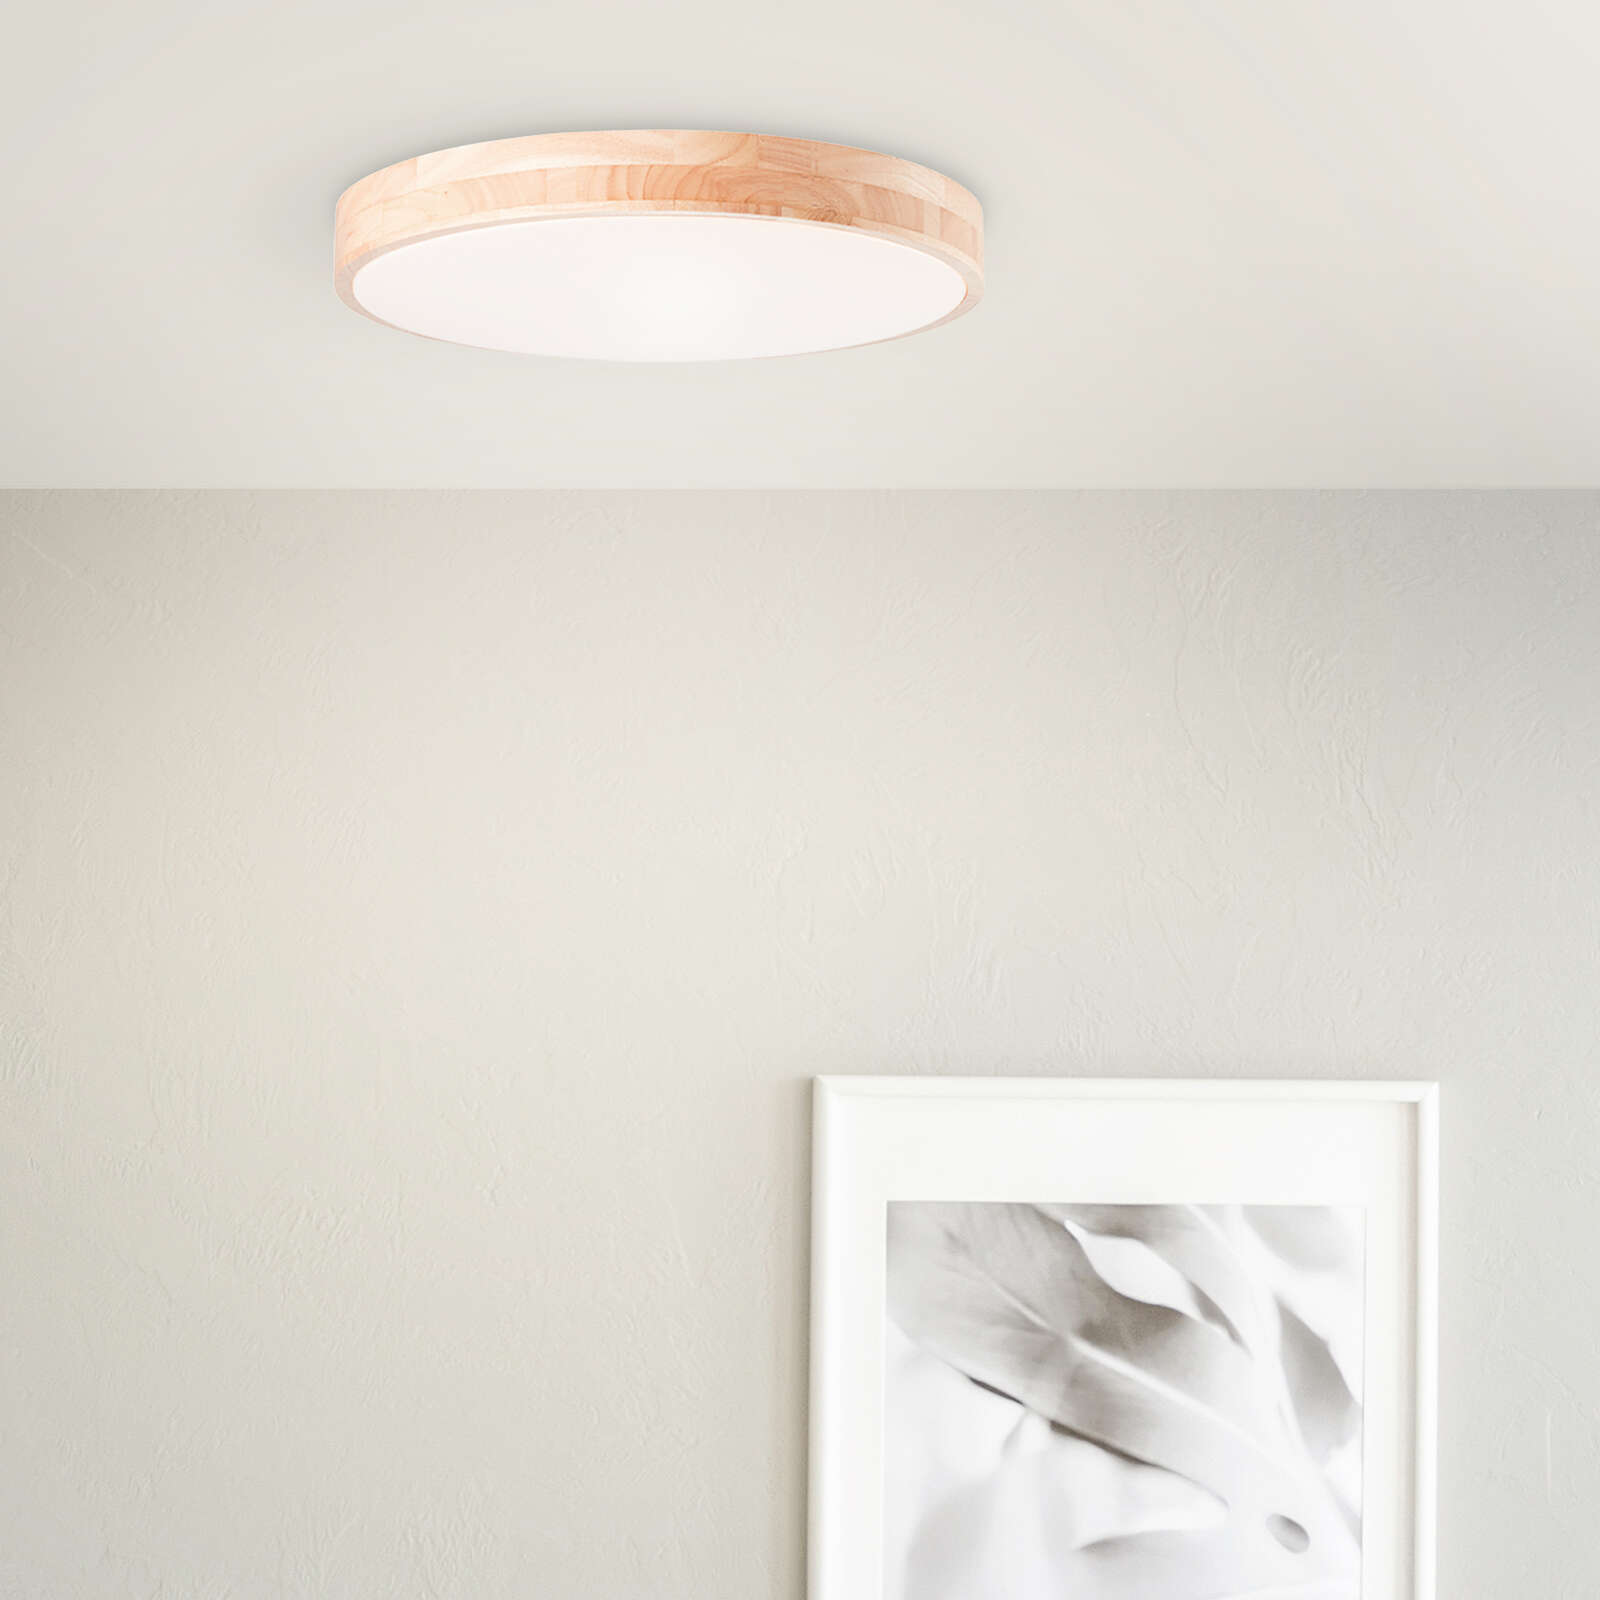             Wooden wall and ceiling light - Niklas 2 - Brown
        